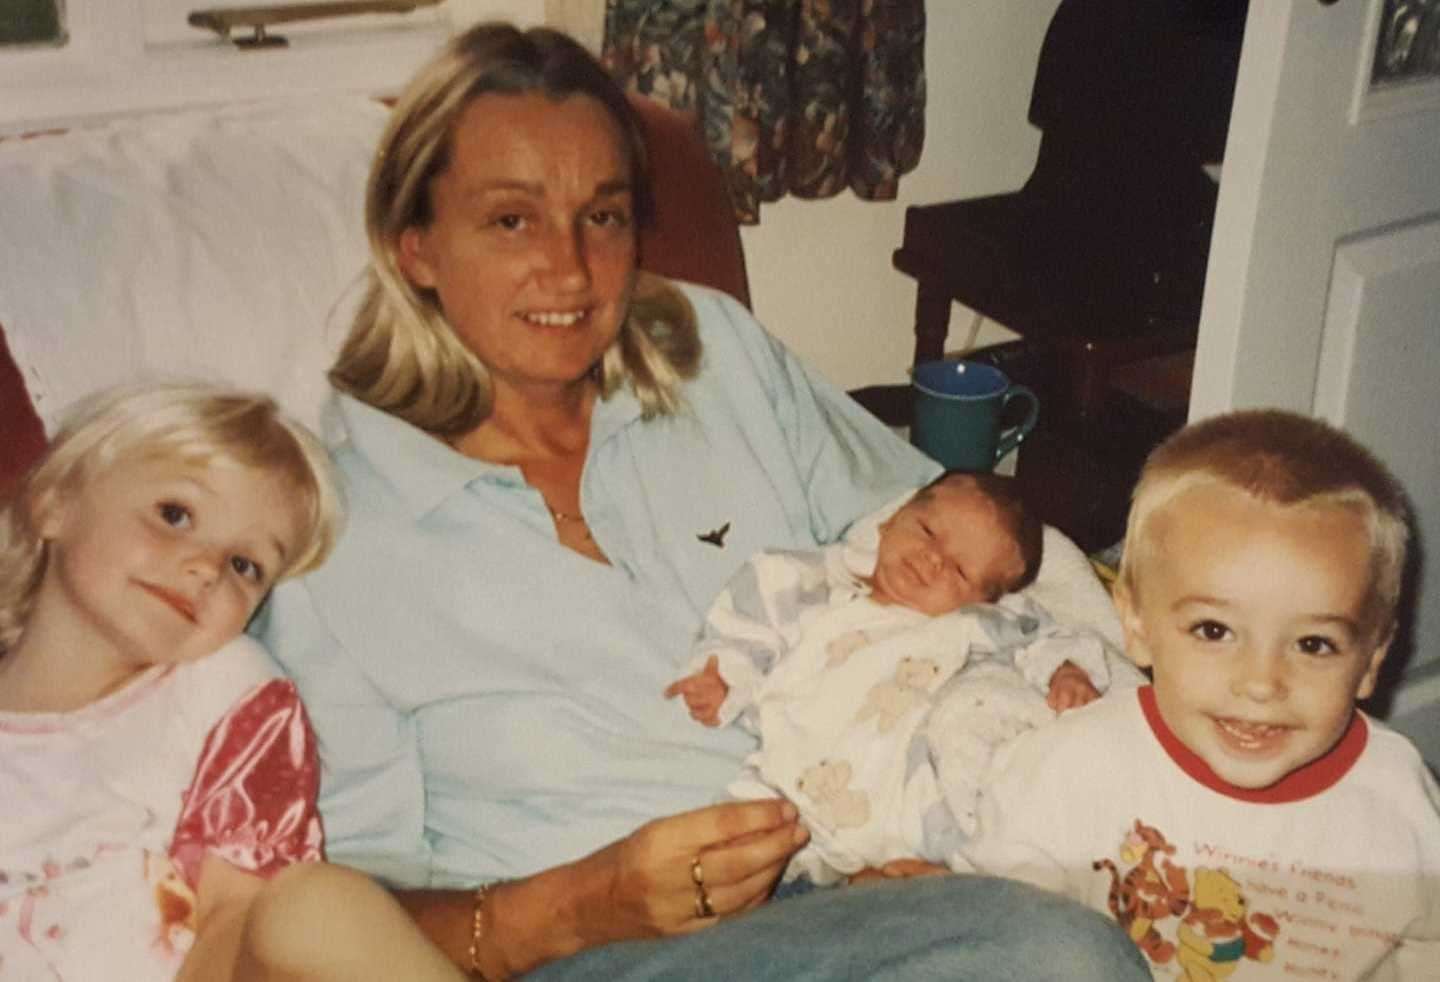 Rosie age 4, mum Melanie with baby Joe and Sam age 2. Picture taken in 1998